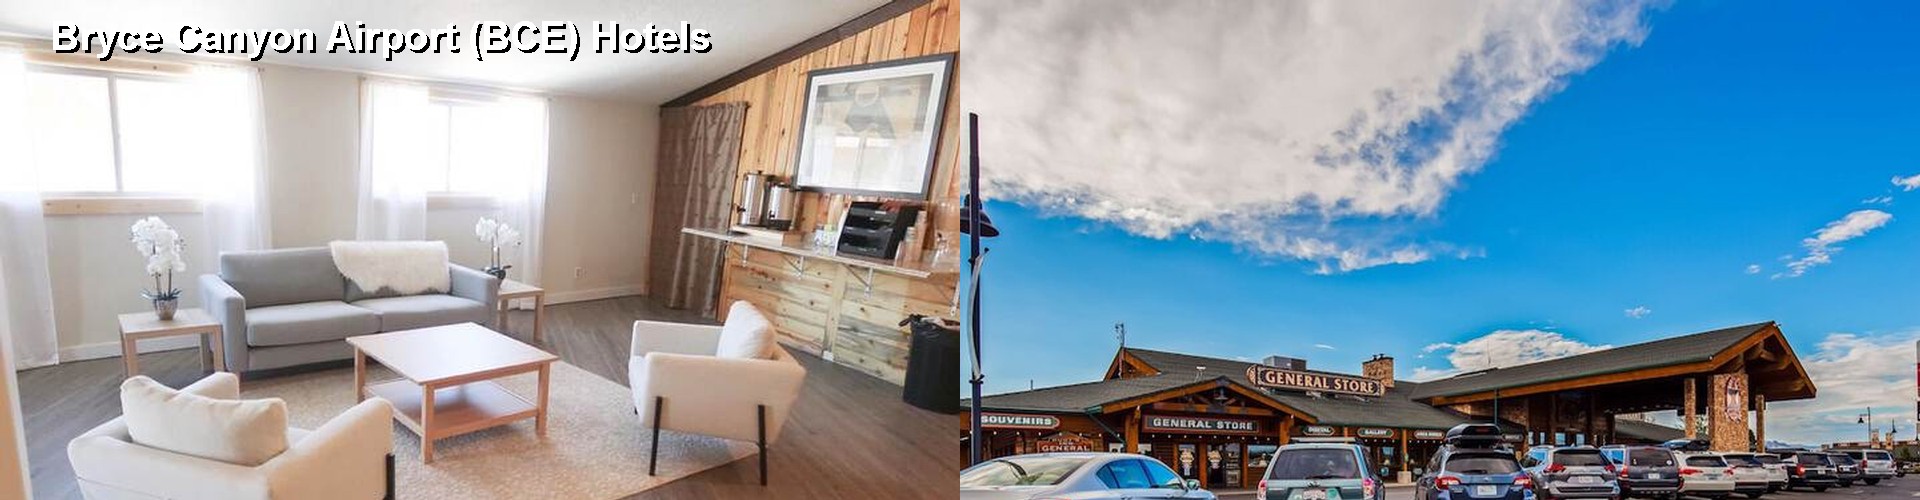 5 Best Hotels near Bryce Canyon Airport (BCE)